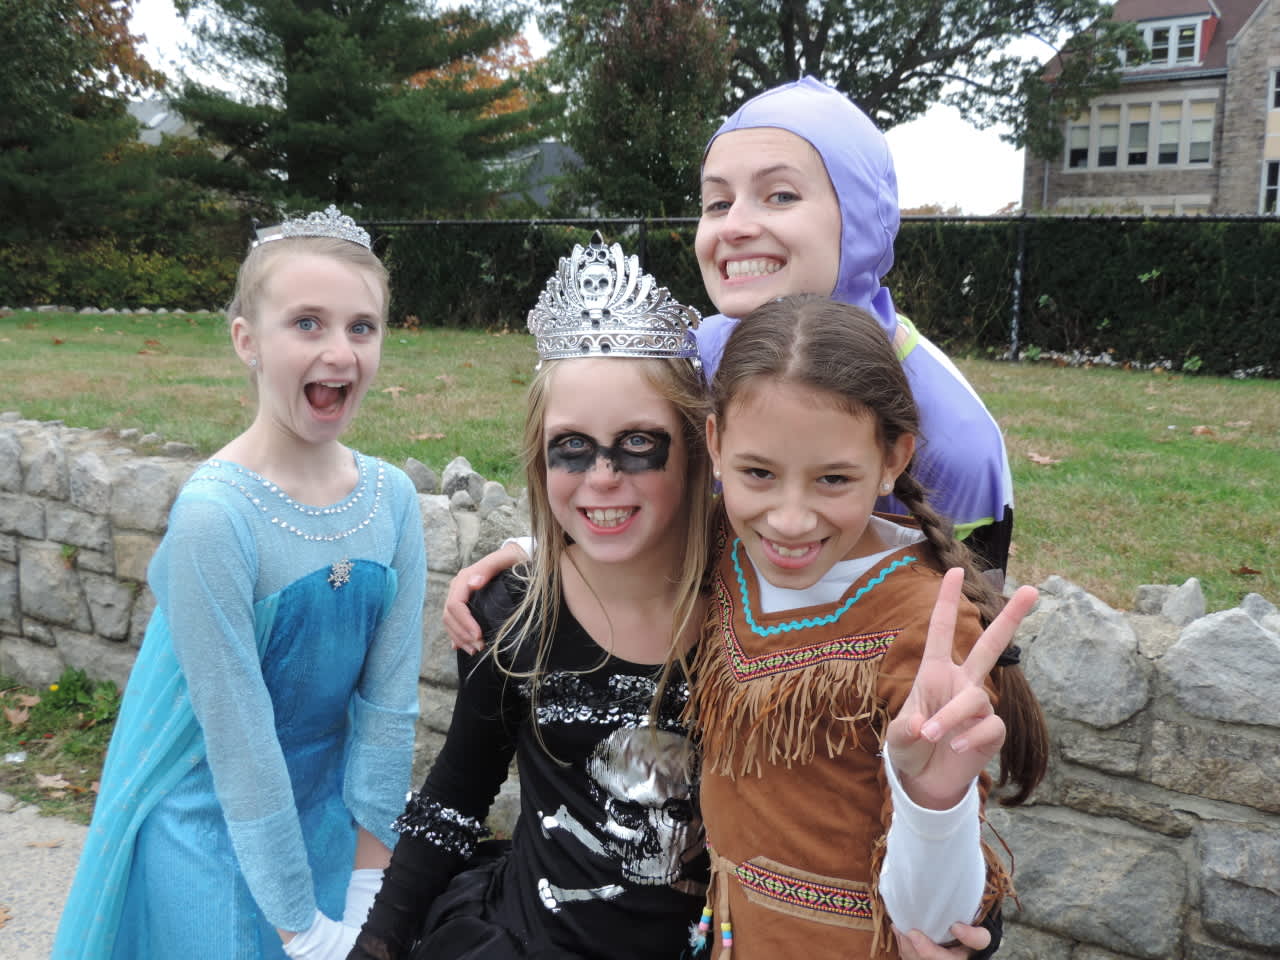 Harrison celebrates Halloween with two parades on Oct. 29 and a haunted house through Halloween.